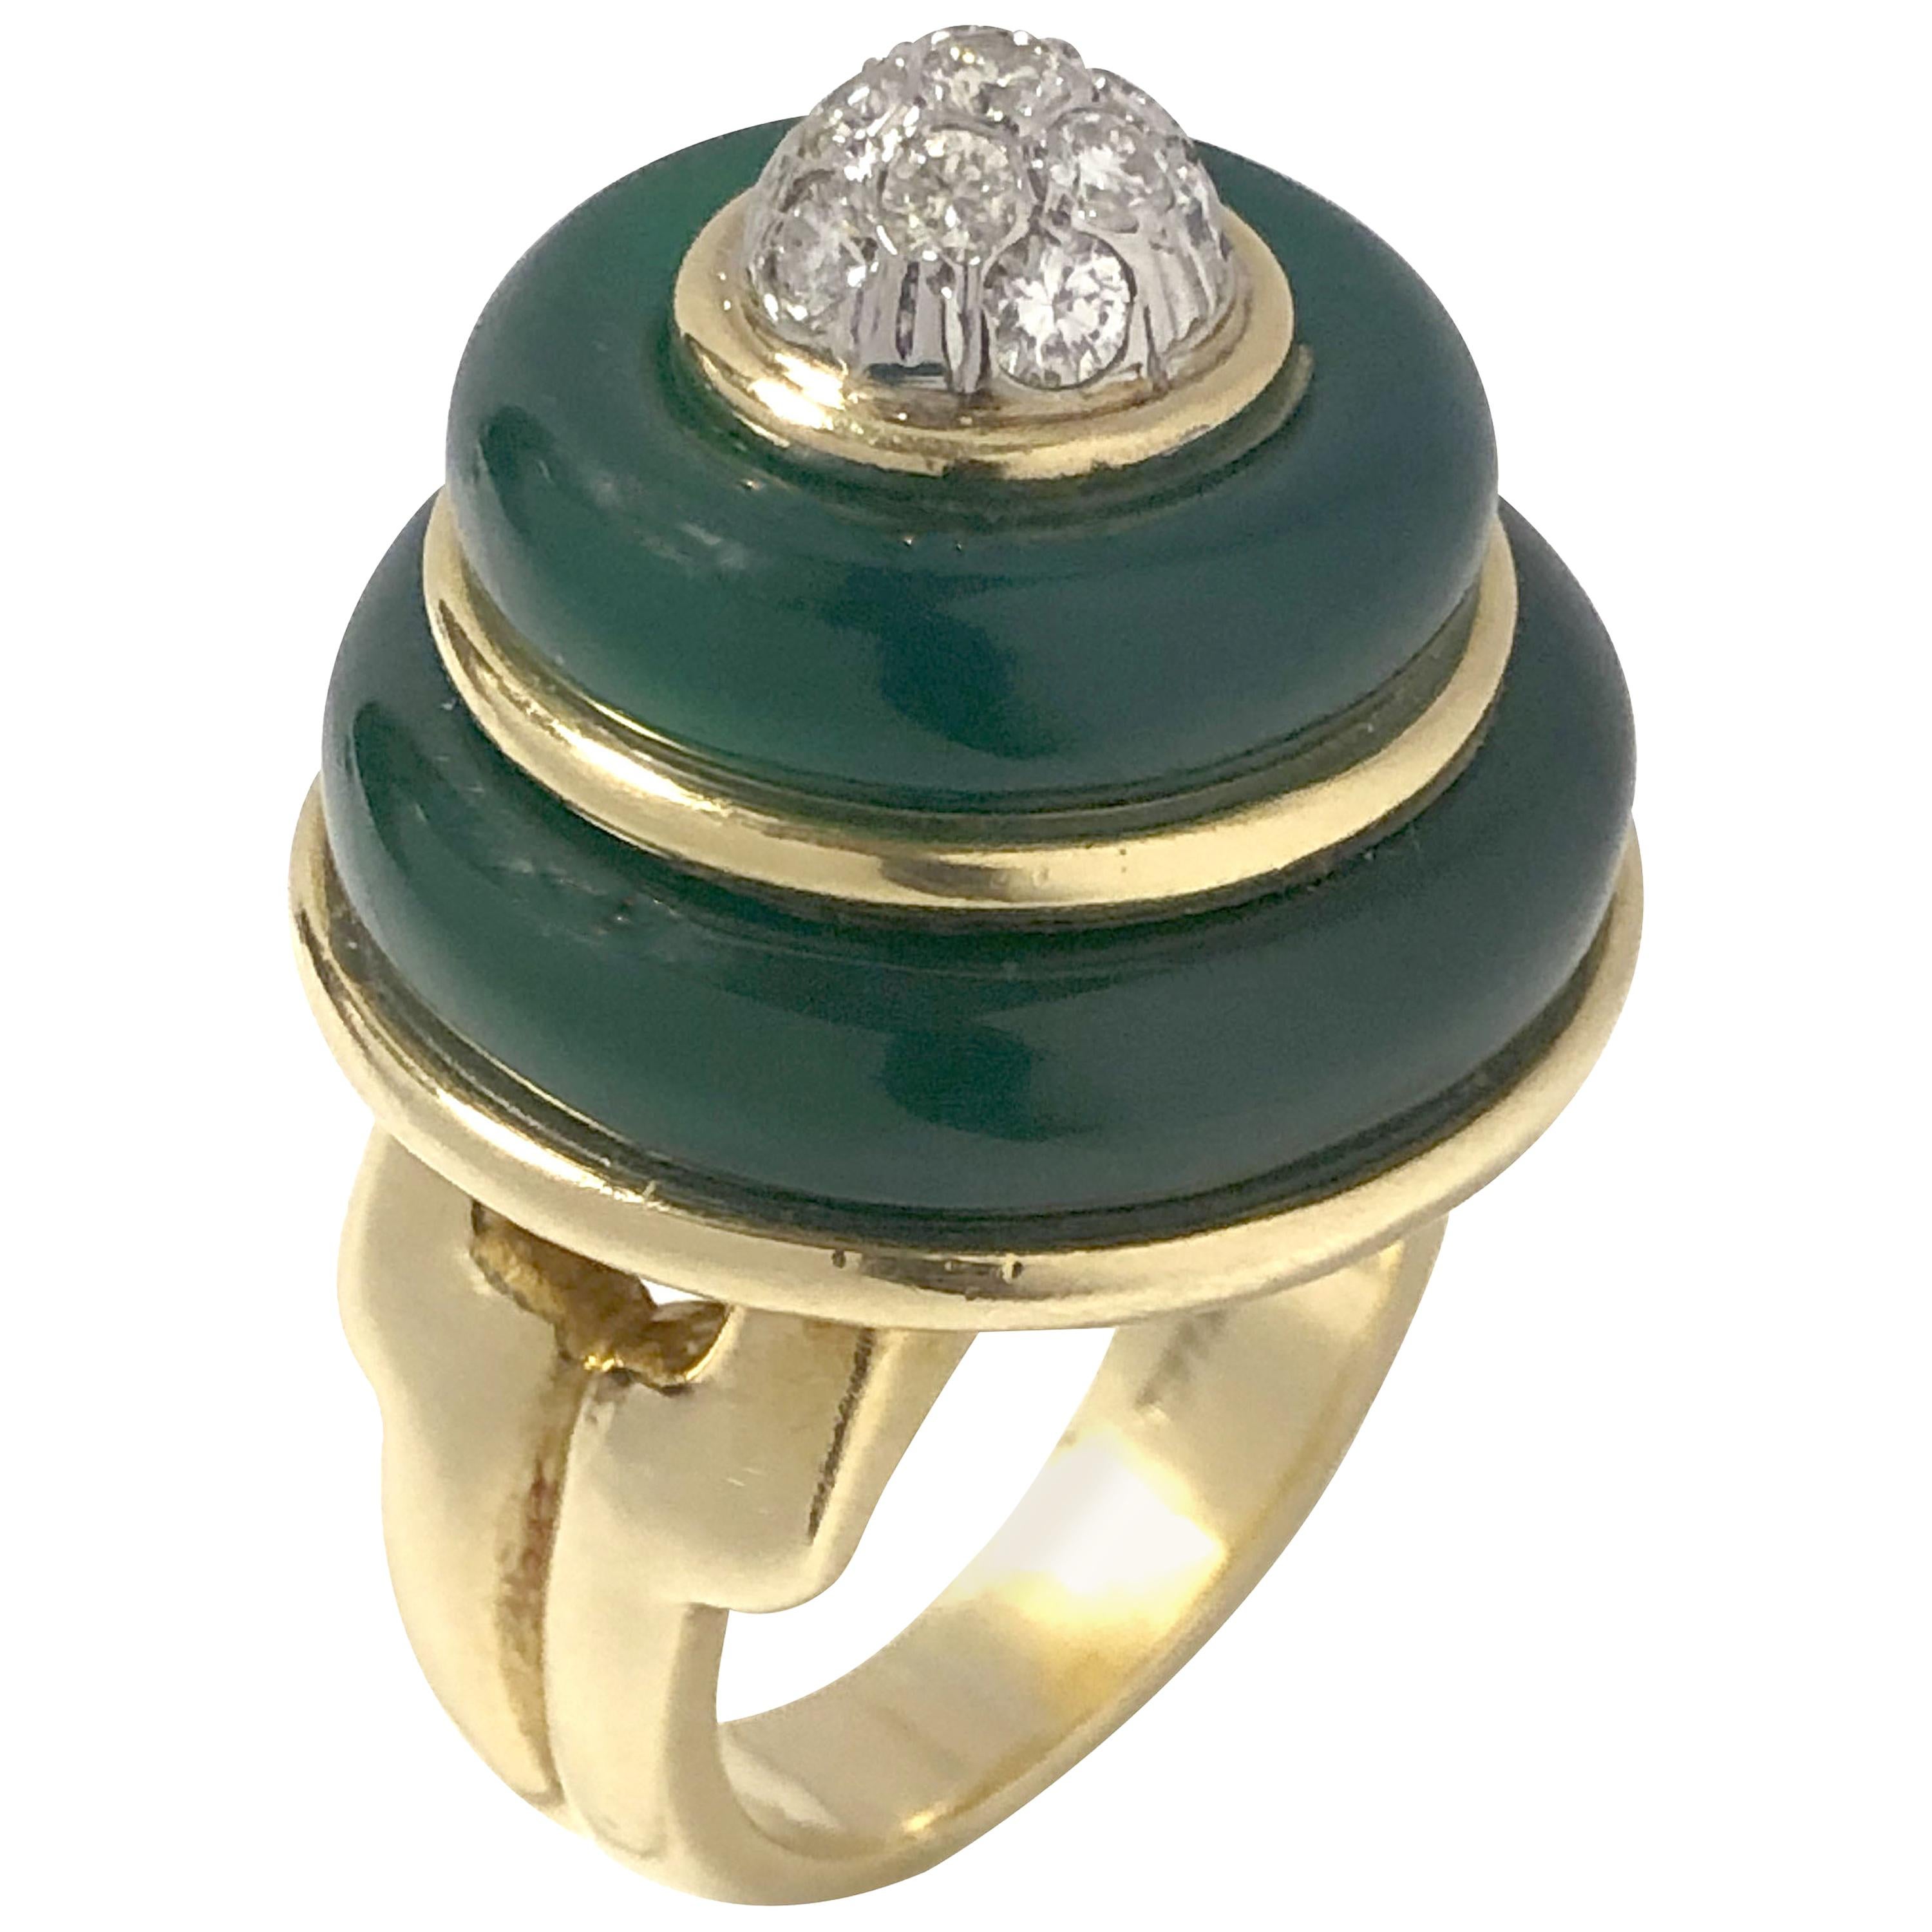 Tiffany & Co. Large Gold Diamond and Chrysophrase "Cake" Ring